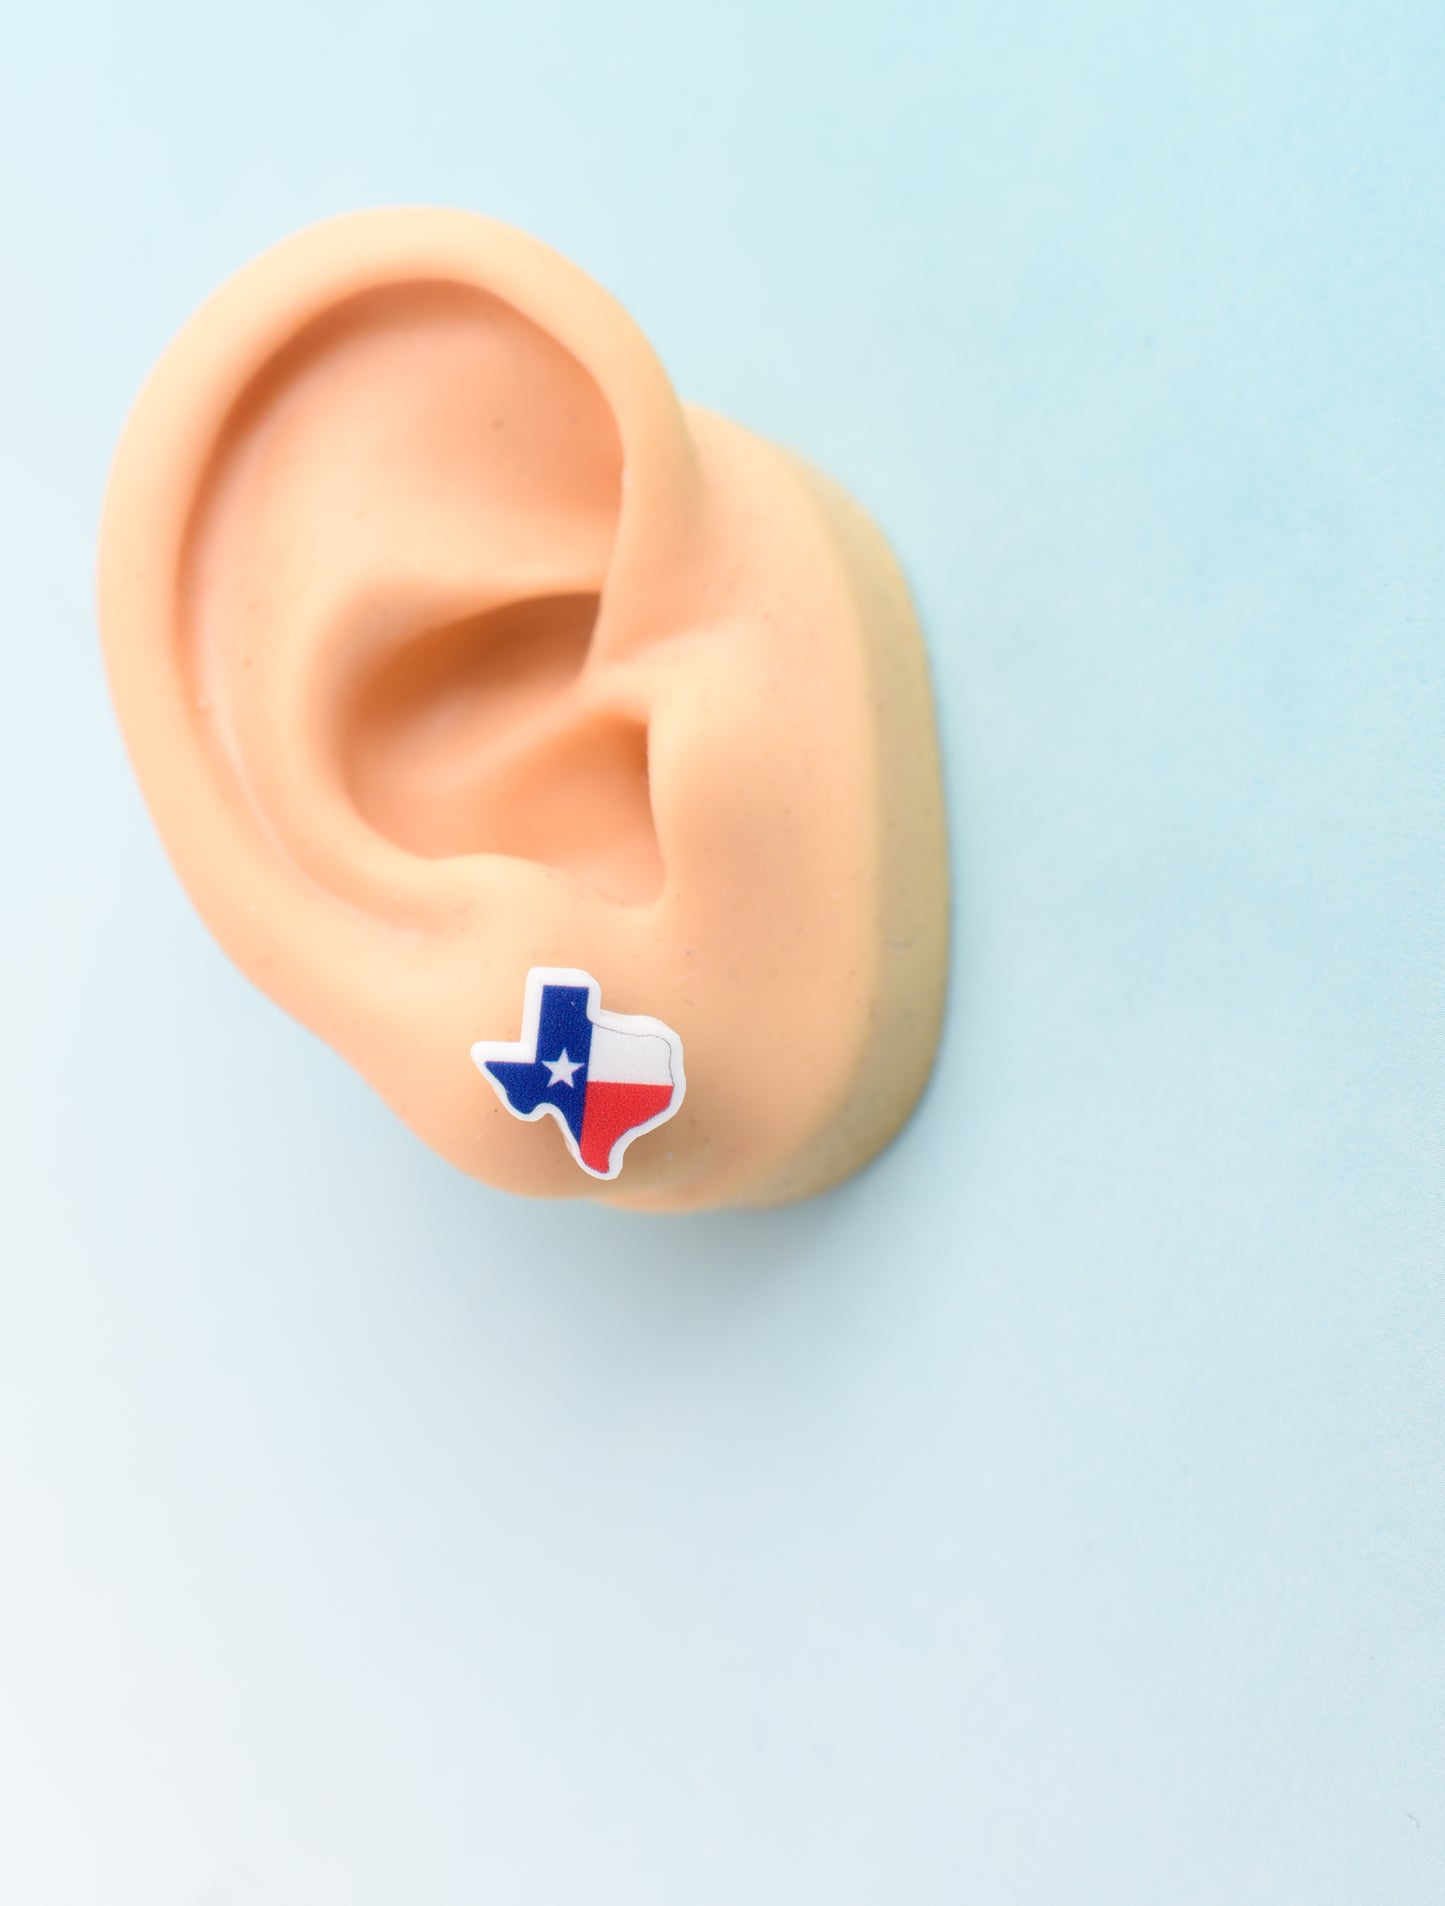 Lonestar State of Texas Earring Trio with Titanium Posts